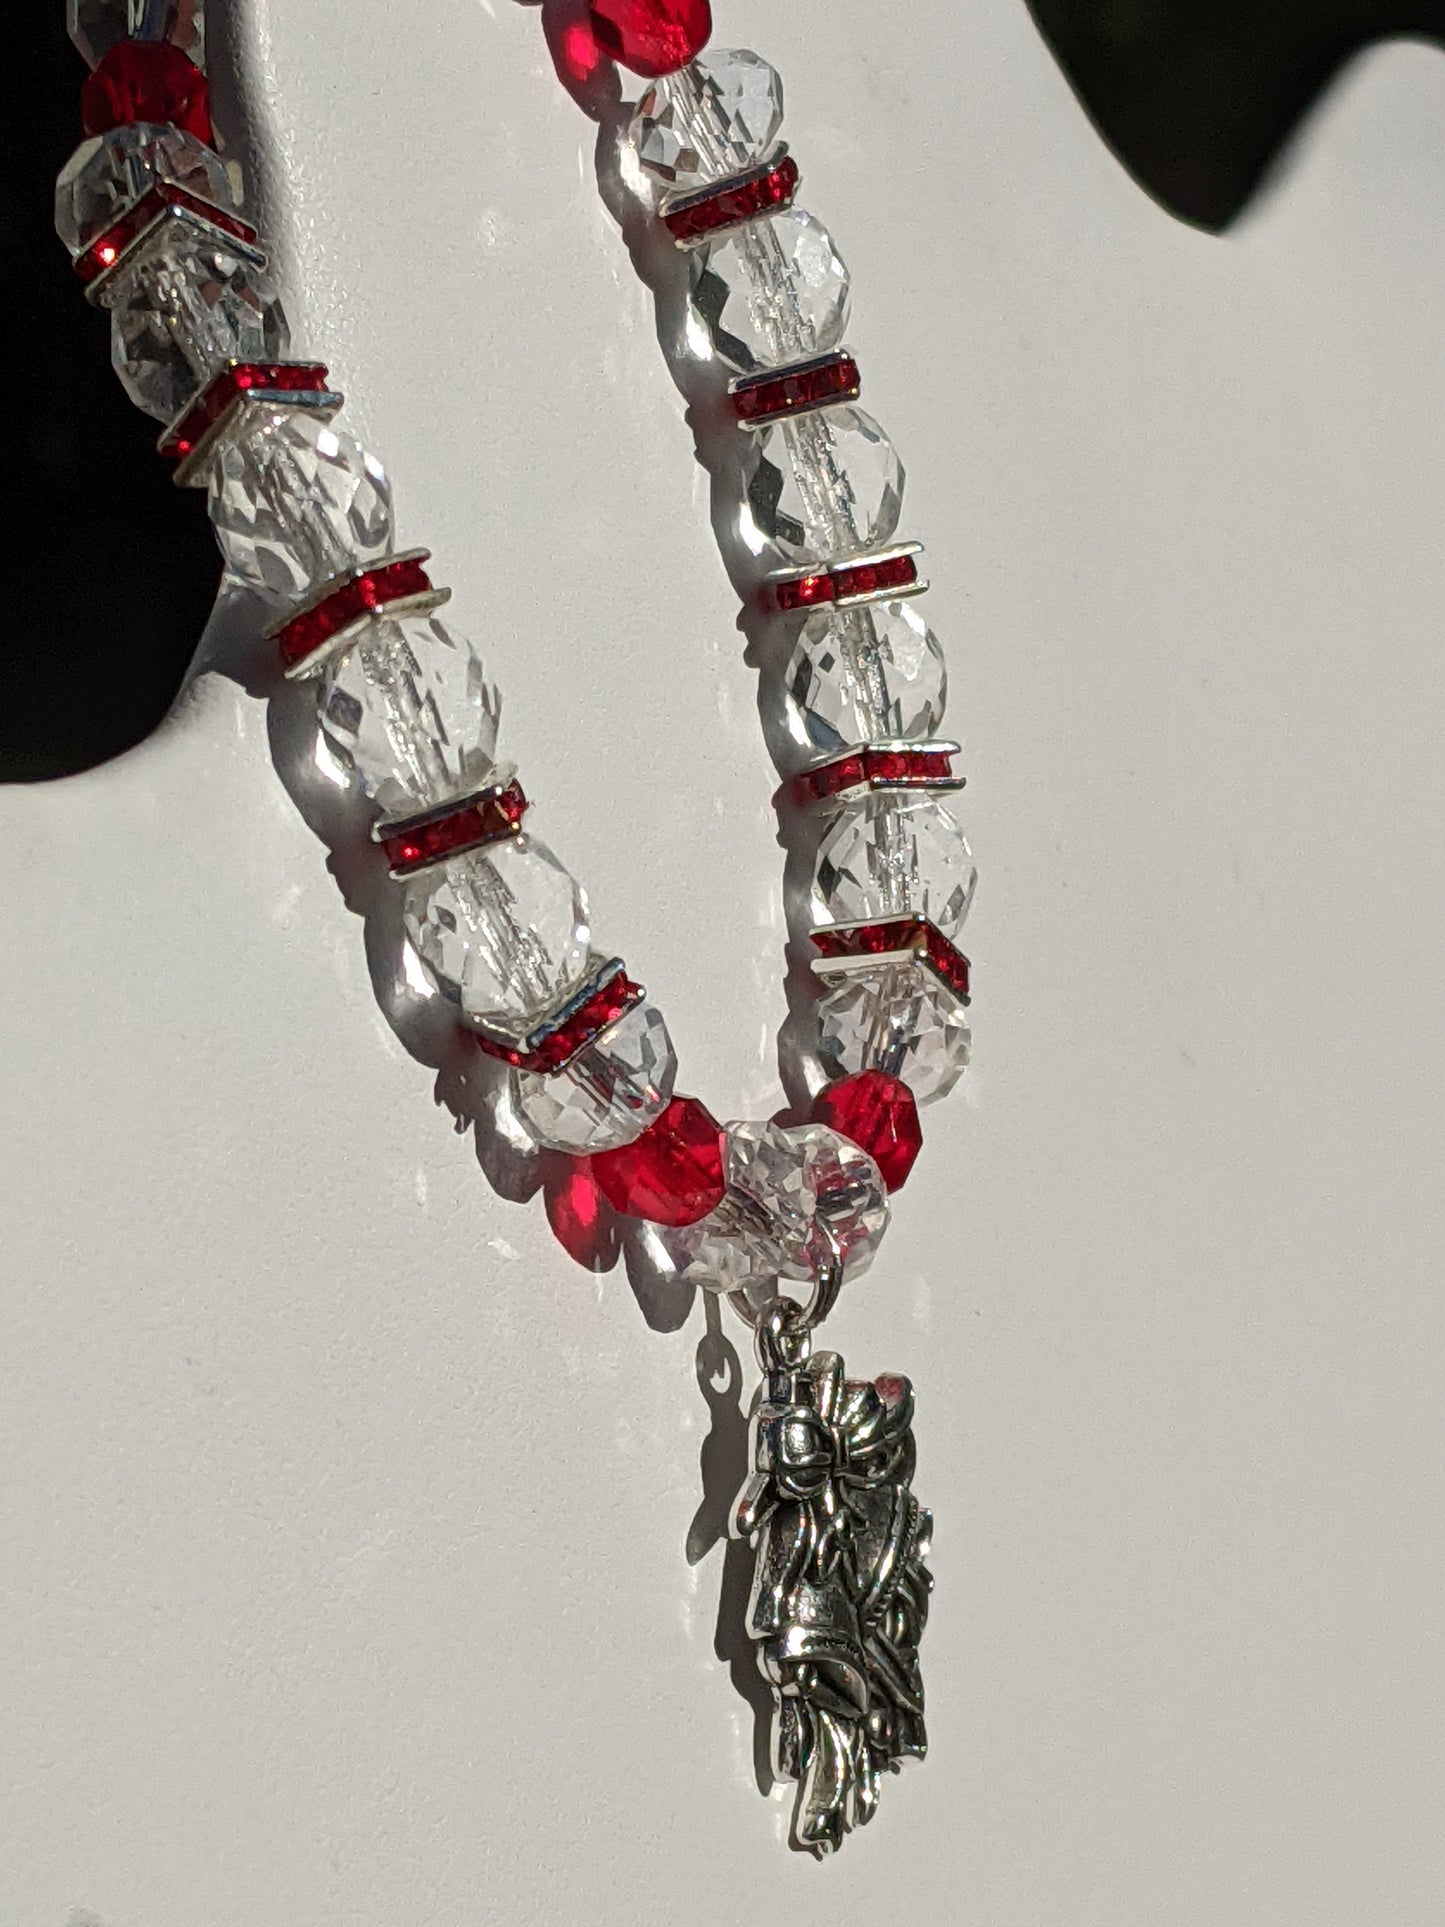 Holiday Bells Charm Bracelet made with Red Swarovski Crystal Accents